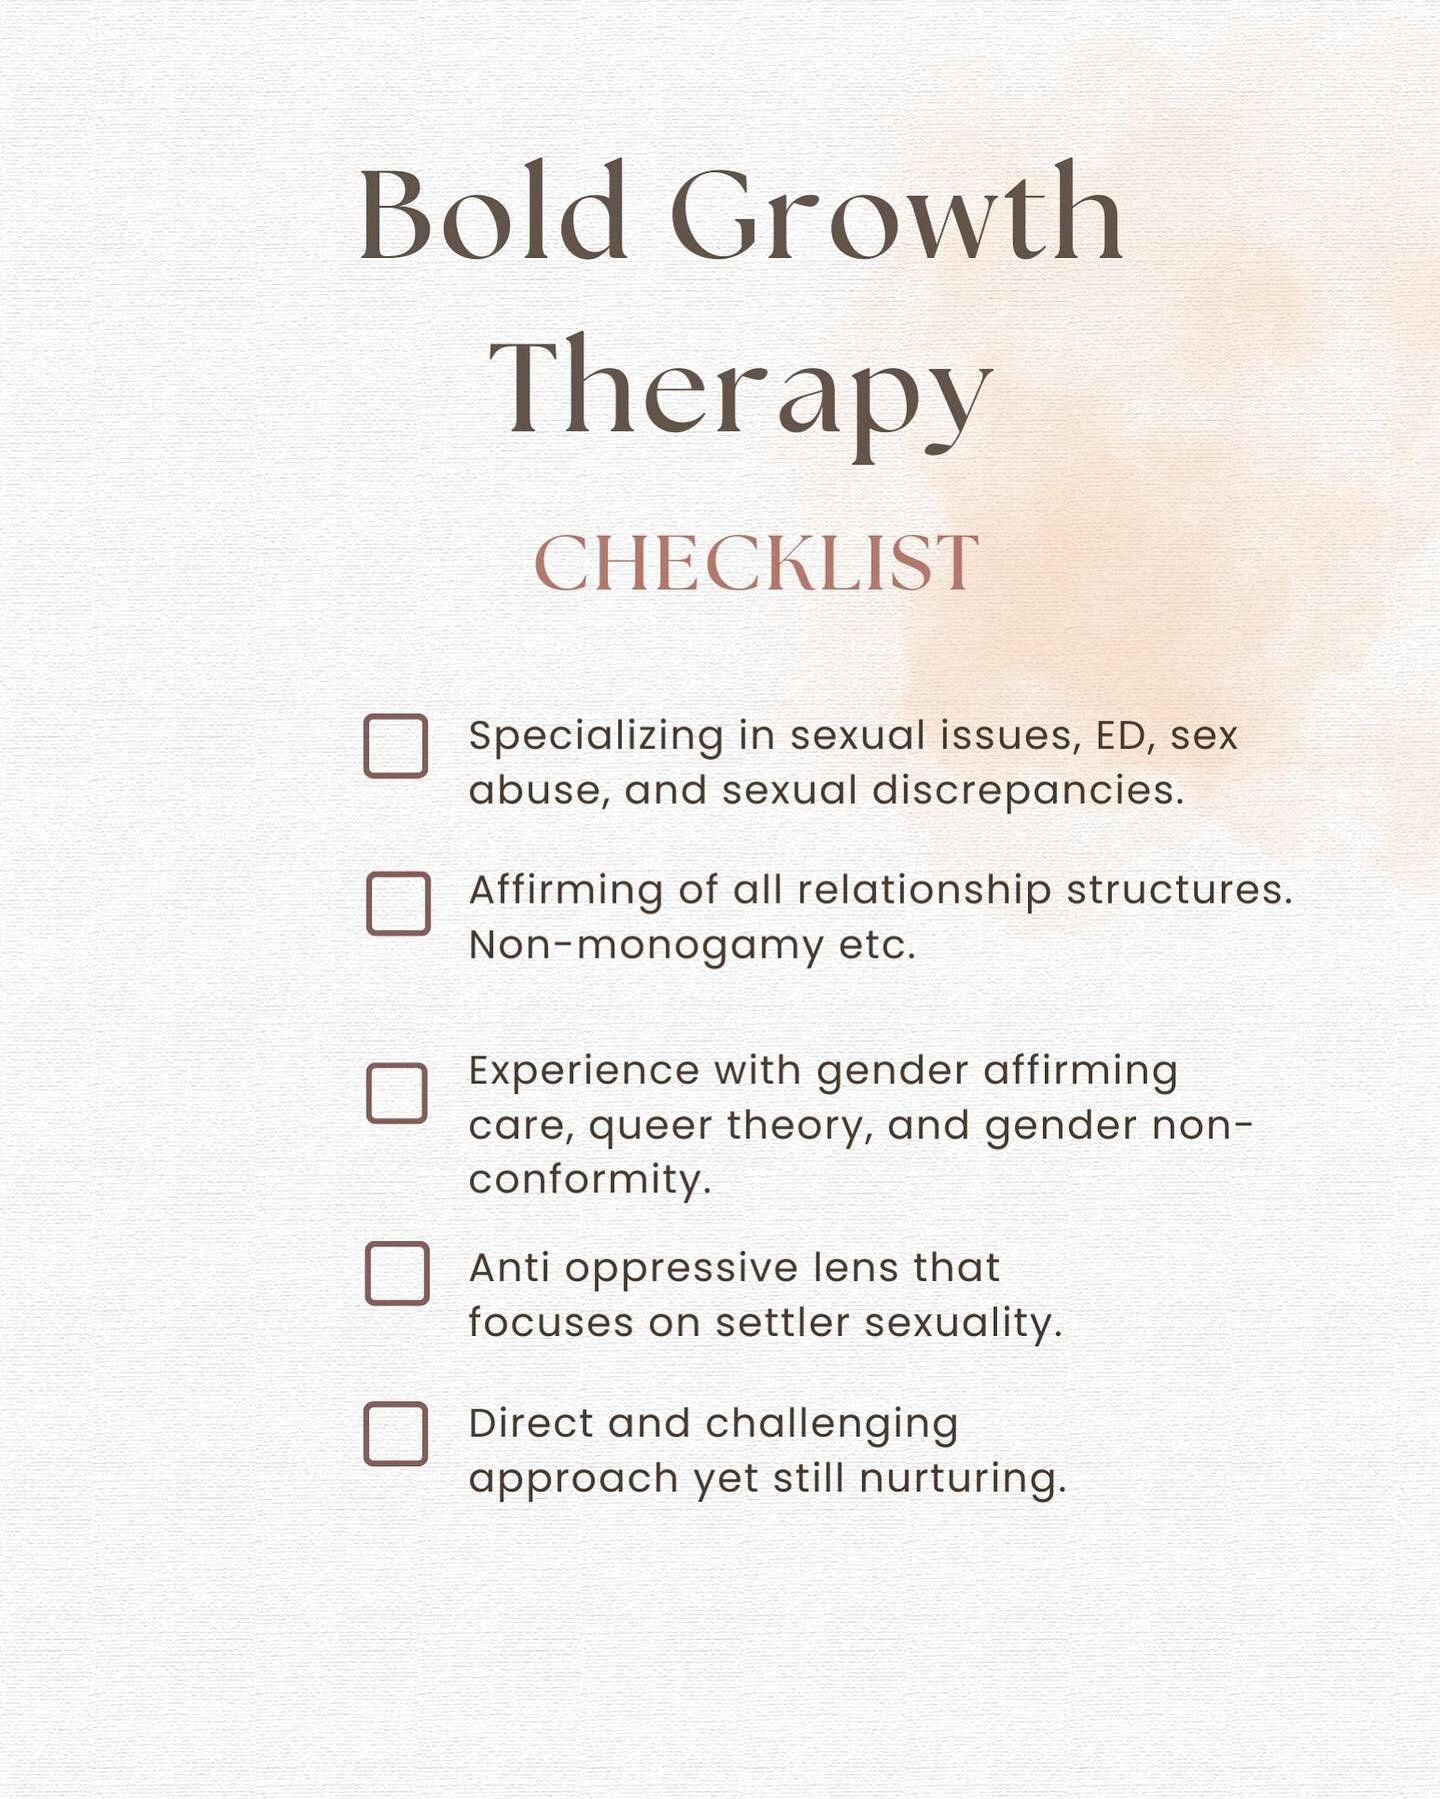 Specialties and services offered.
#therapy #portlandtherapists #oregontherapists #sextherapy #mentalhealthawareness #sexualhealthawareness